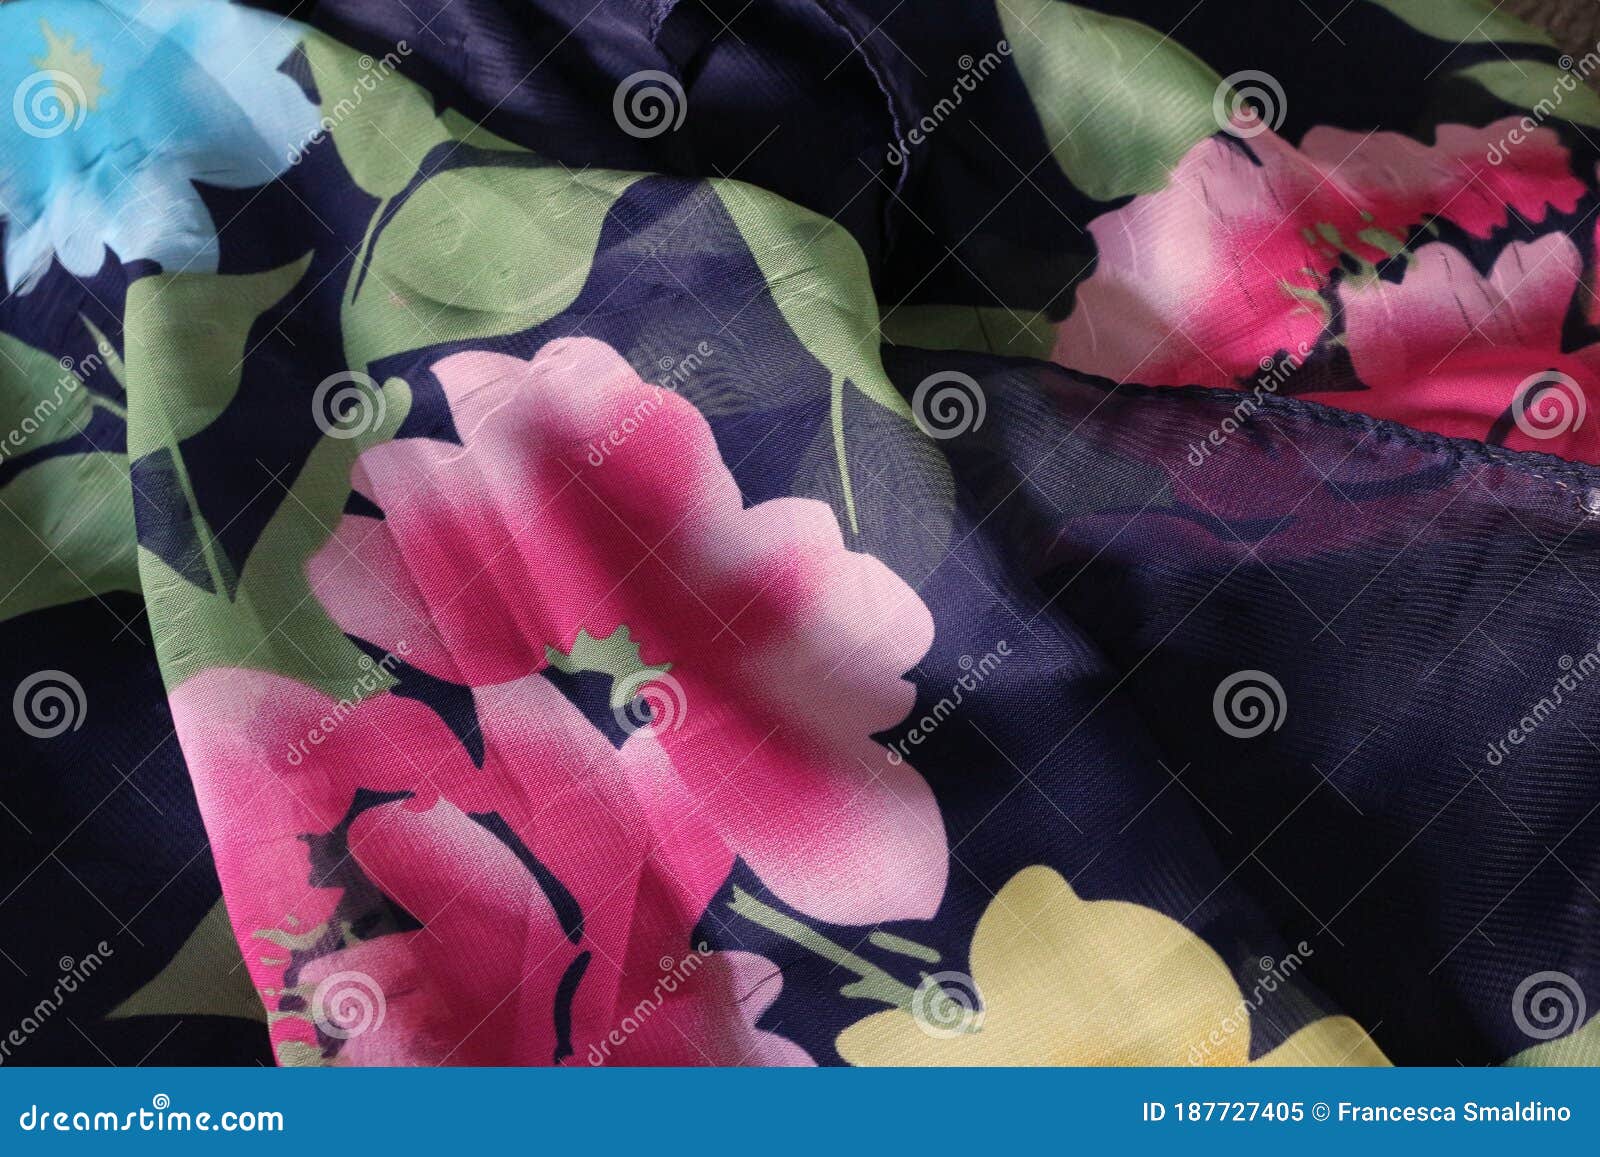 fabric decorated with fantasy s, texture